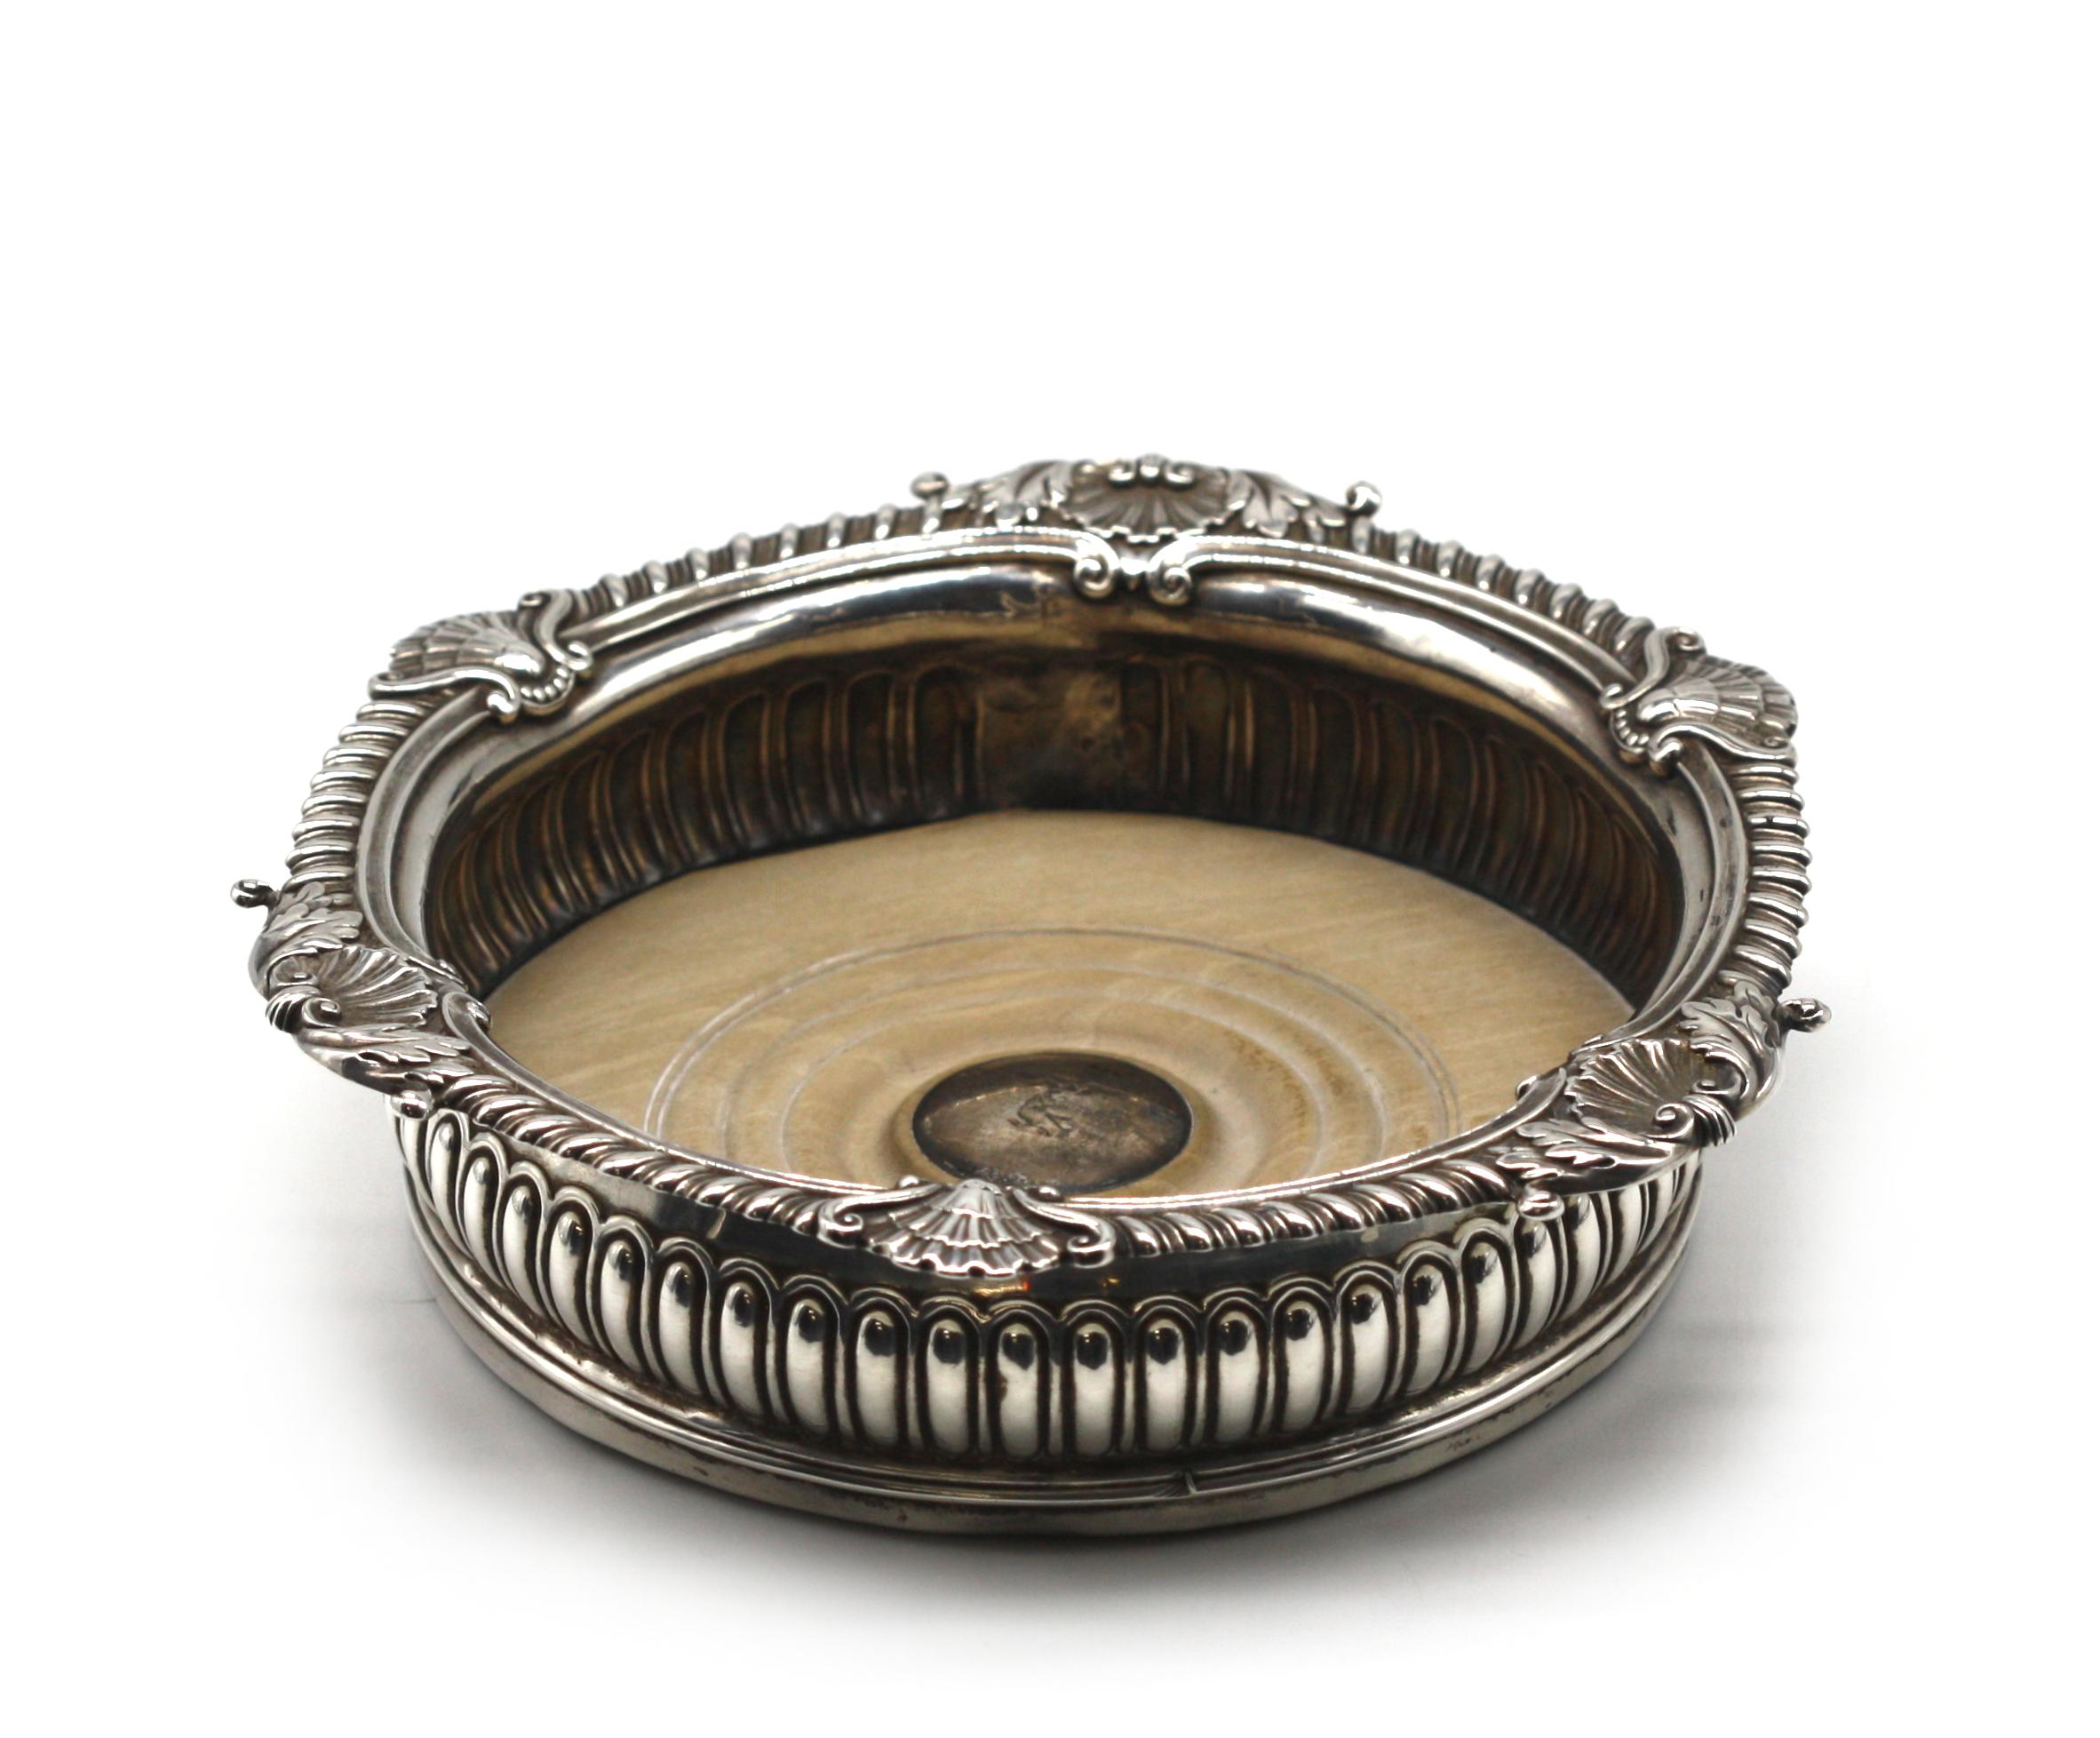 
Edwardian Silver and Treen Wine Coaster
1910, London hallmarks. Circular chased with gadroons and shells.
Height 2.75 in., Diameter 7 in.